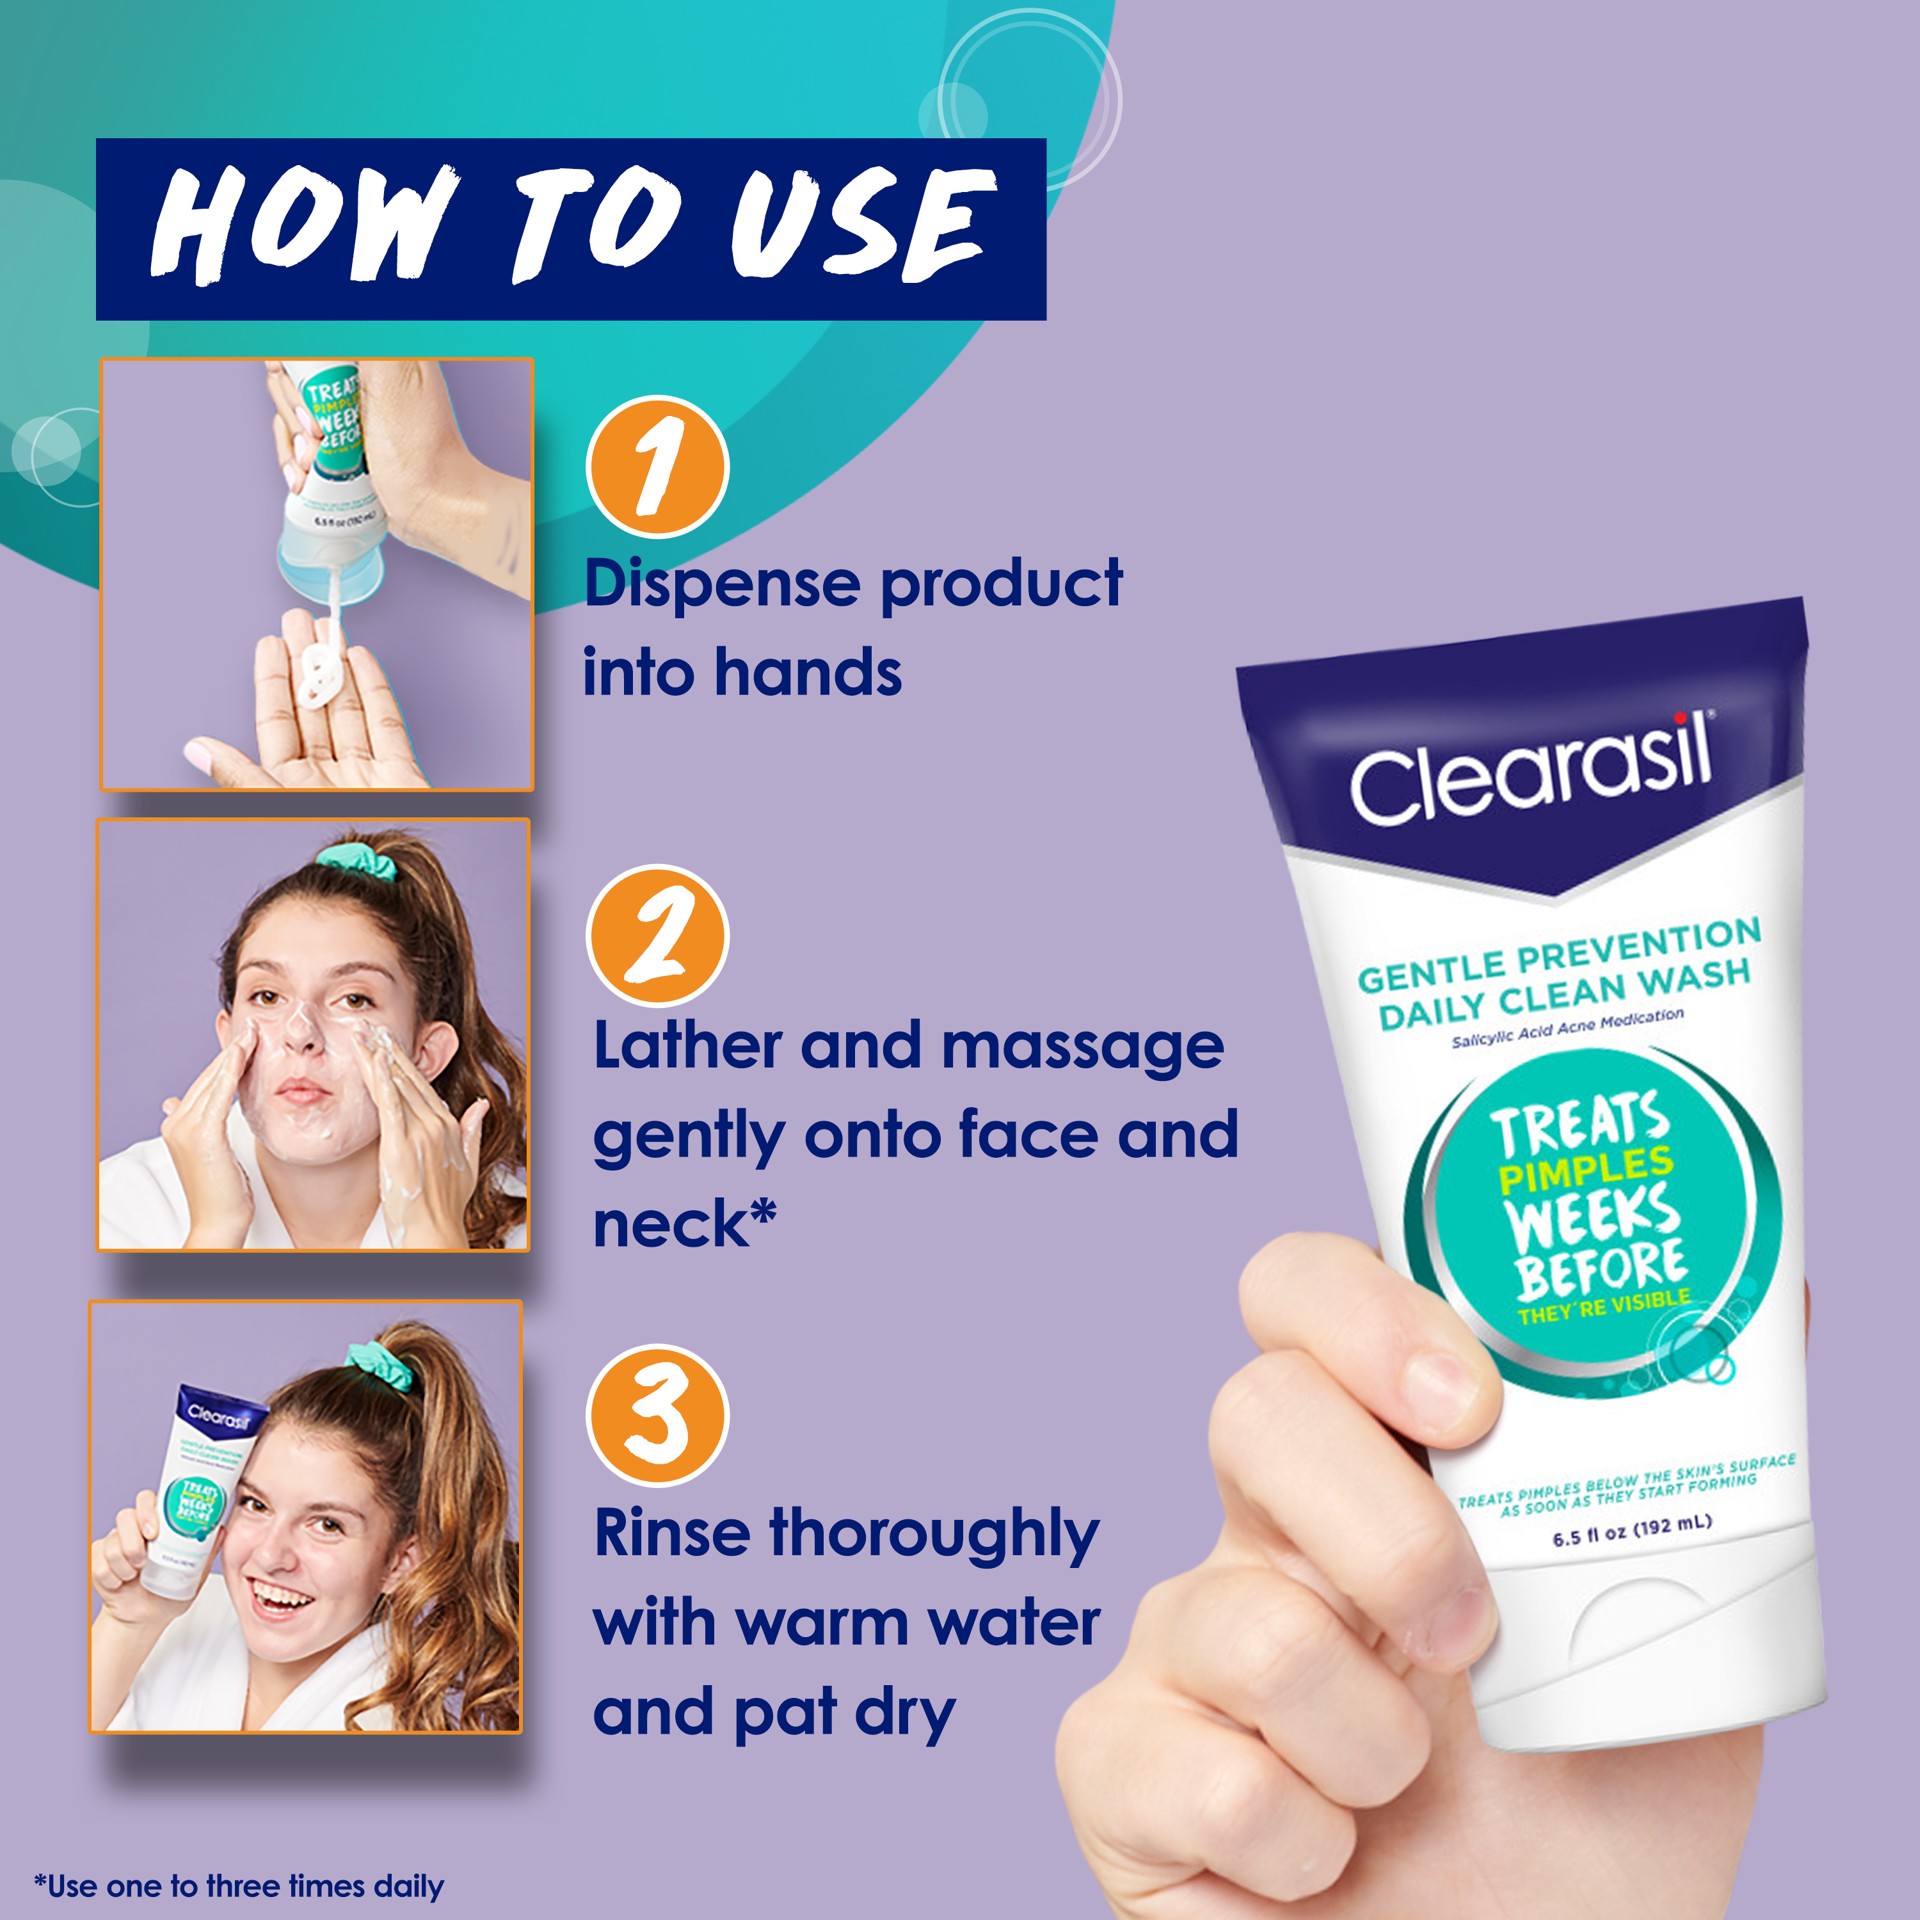 slide 4 of 5, Acne Treatment Face Wash - Clearasil Gentle Prevention Daily Clean Wash with Salicylic Acid Acne Medication, 6.5 fl oz, 6.50 fl oz